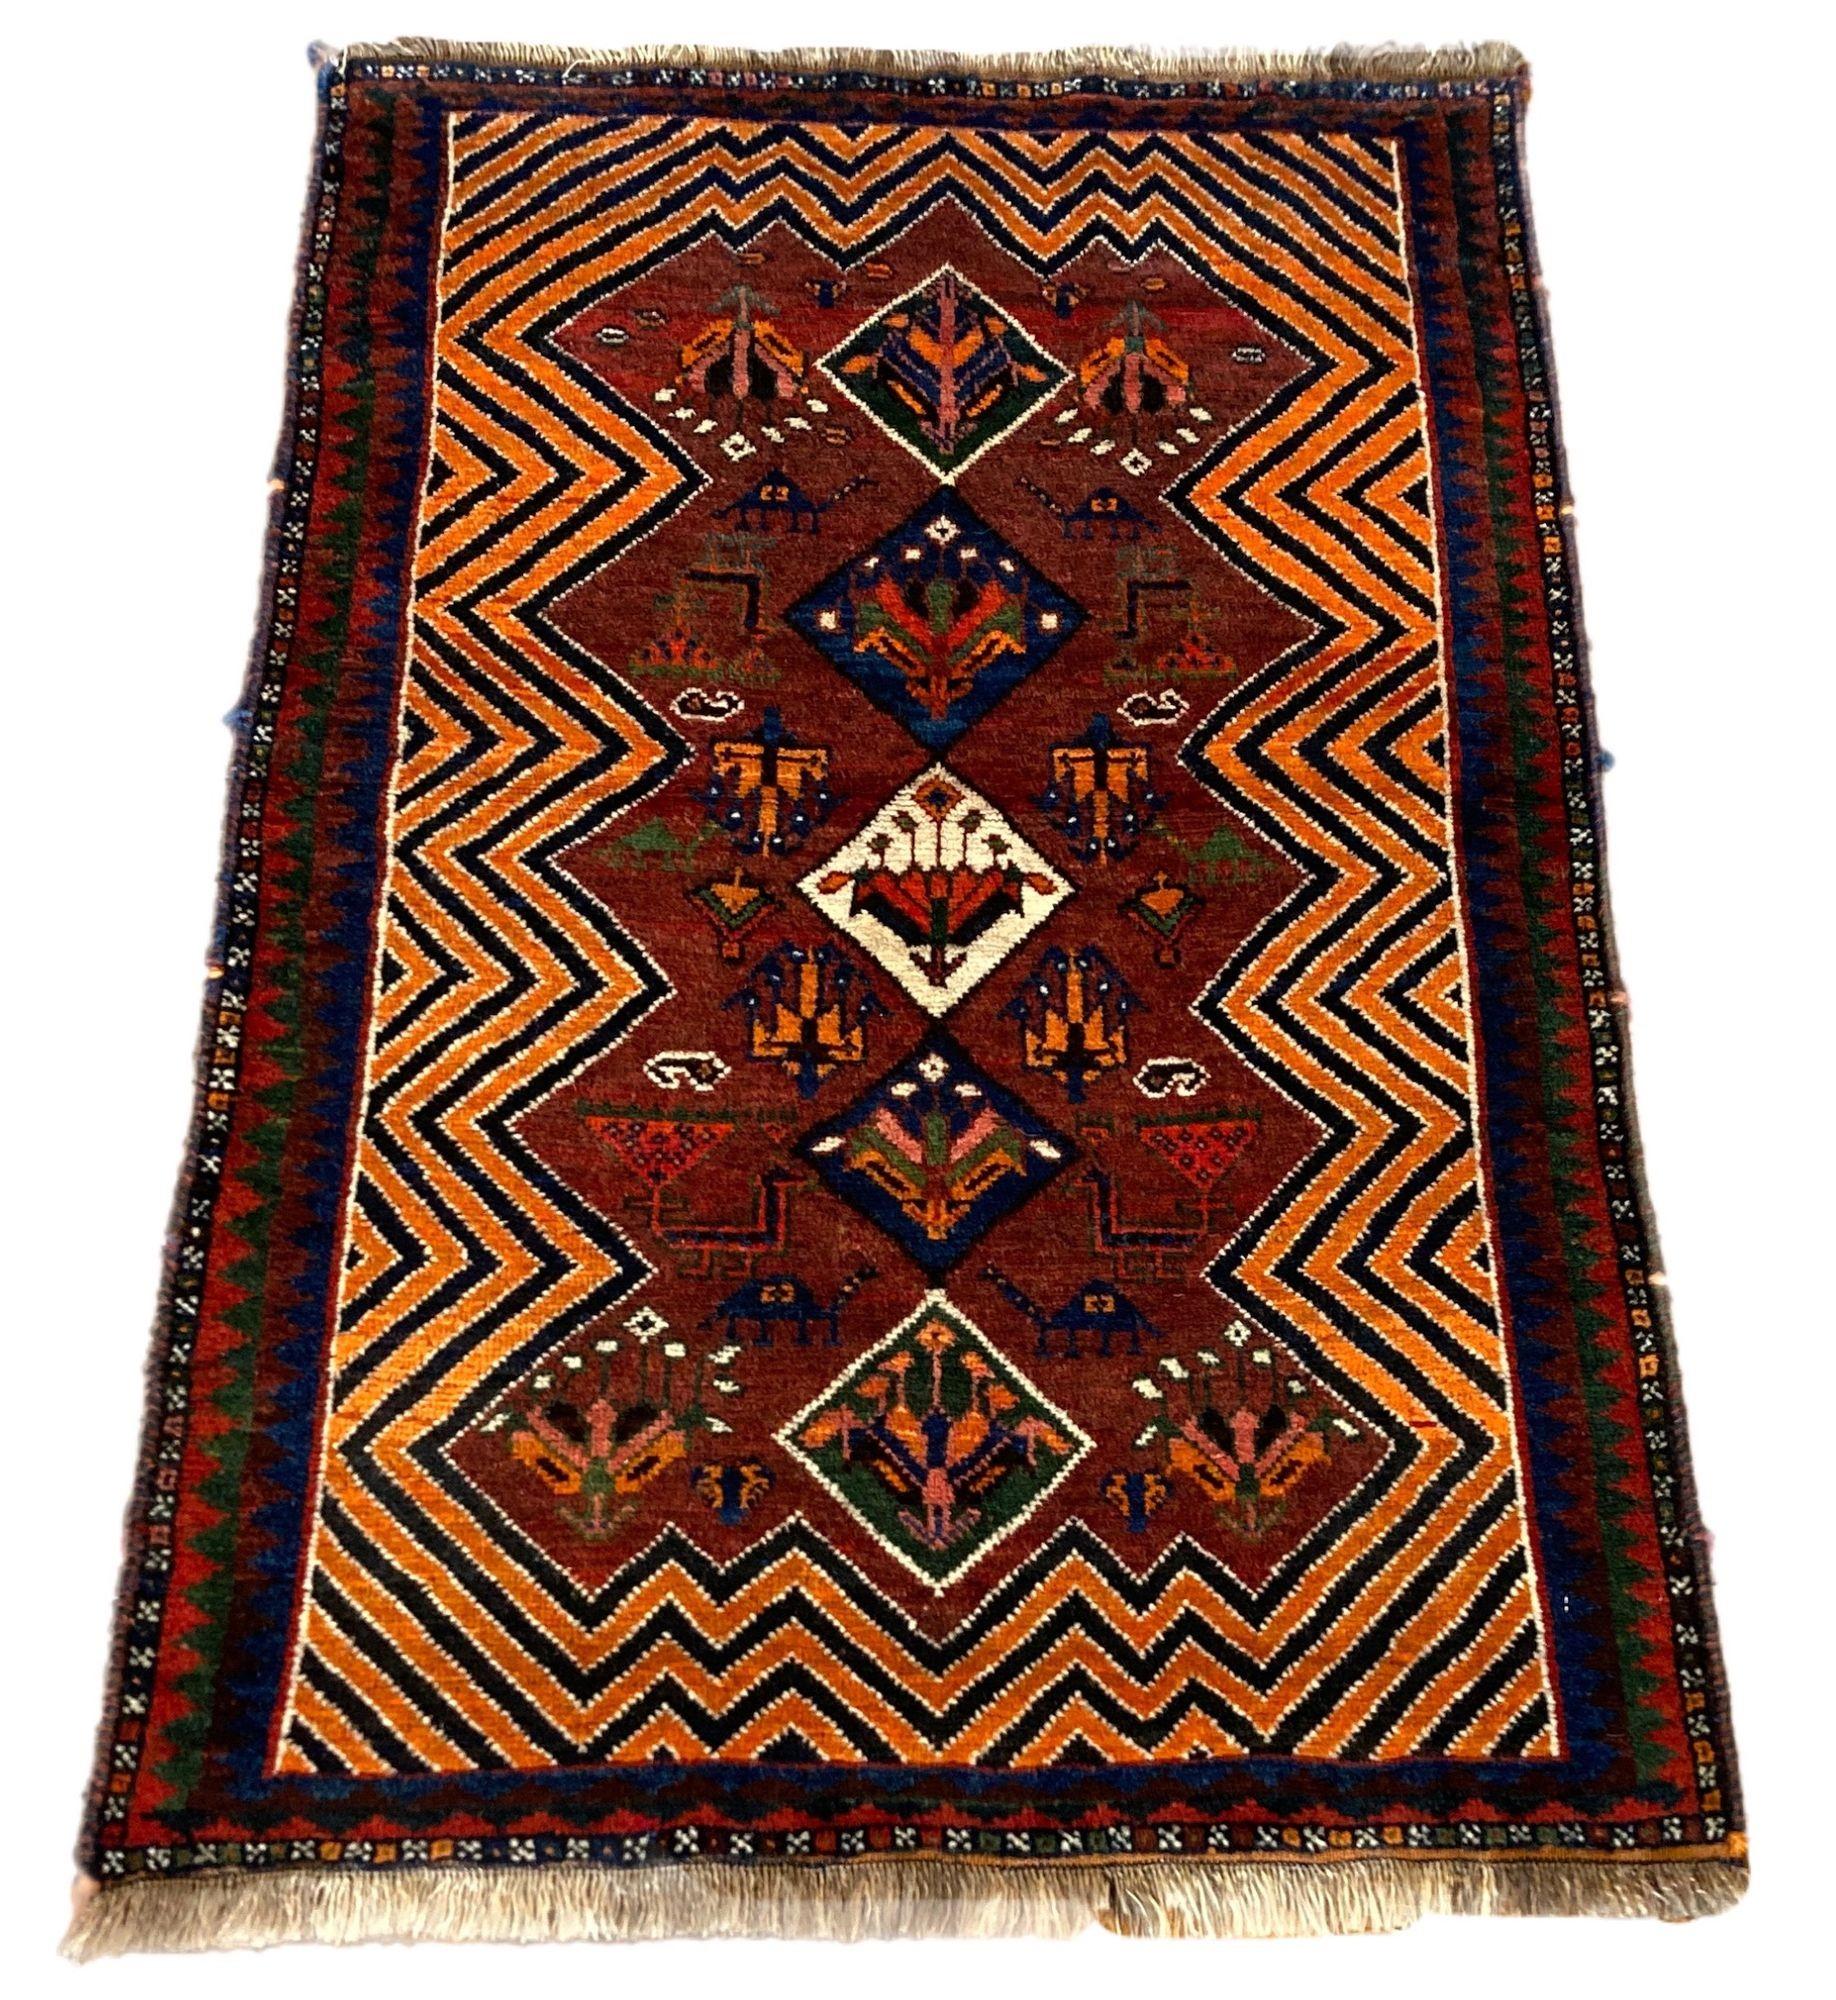 A lovely antique Gabbeh rug, hand woven by the nomadic Qashqai tribe circa 1920. The design features 5 medallions on a rich terracotta field. Some interesting characters including peacocks and camels and a great example of tribal art!
Size: 1.58m x